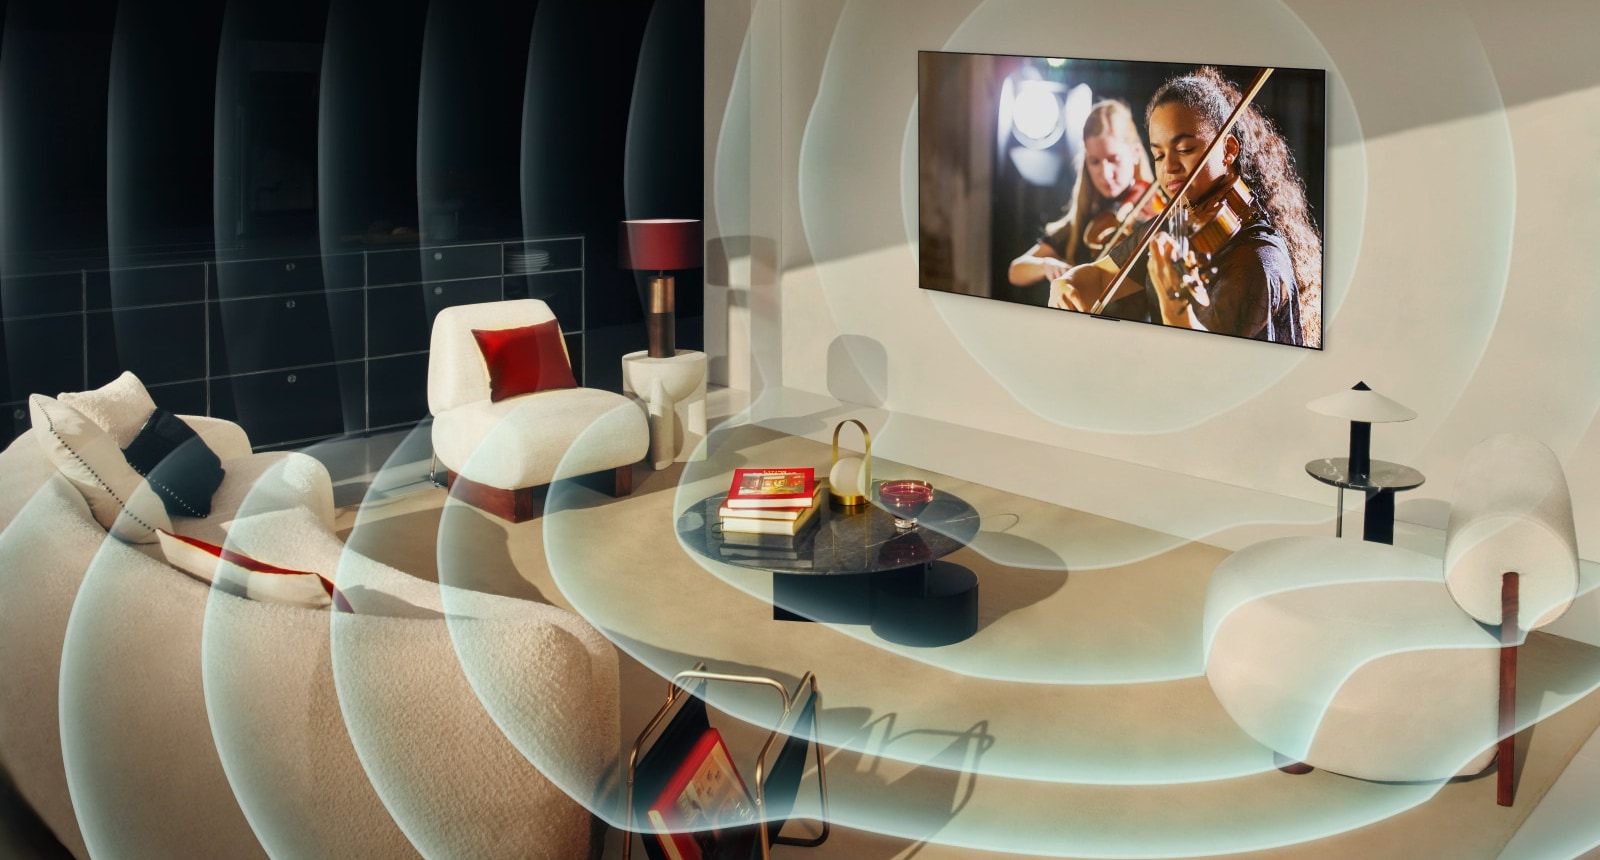 A video shows an LG OLED TV in a modern city apartment. A grid overlay appears over the image like a scan of the space, and then blue soundwaves project from the screen, perfectly filling the room with sound.